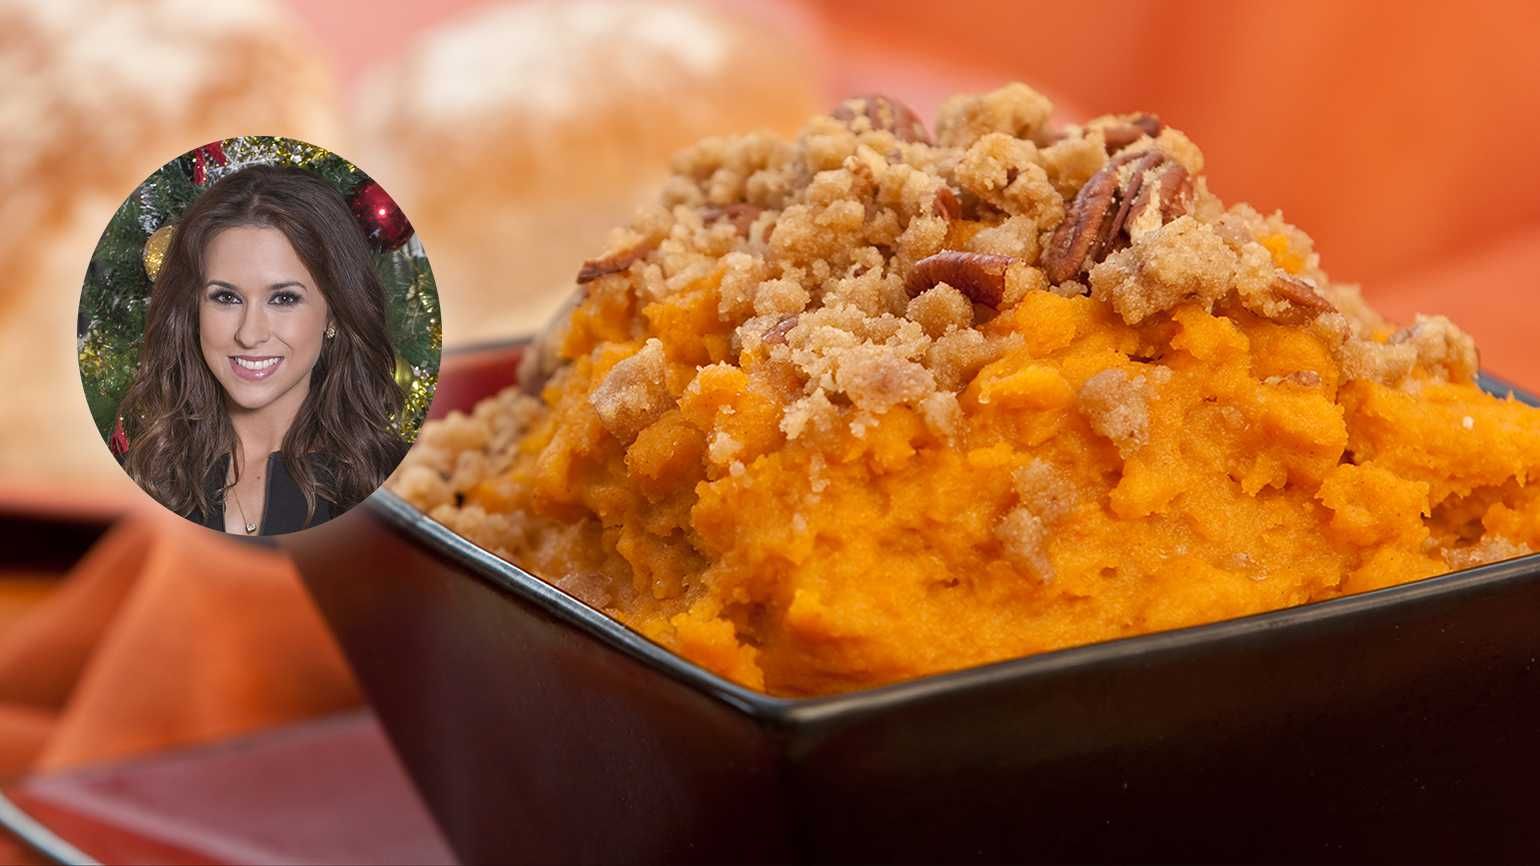 Lacey Chabert and Sweet Potato Casserole (Getty Images)